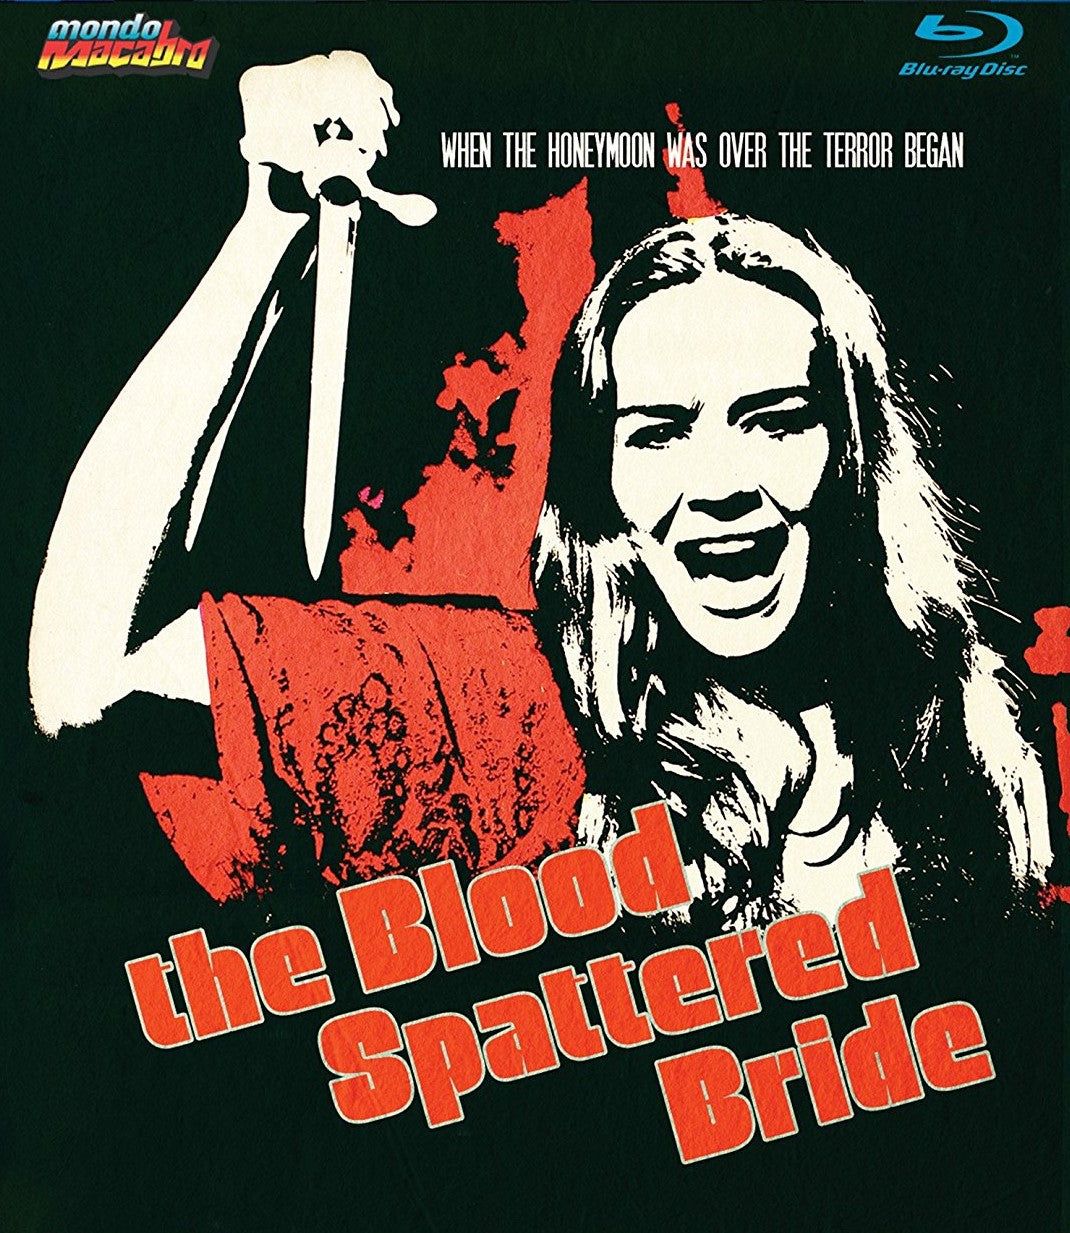 The Blood Spattered Bride Blu-Ray Blu-Ray